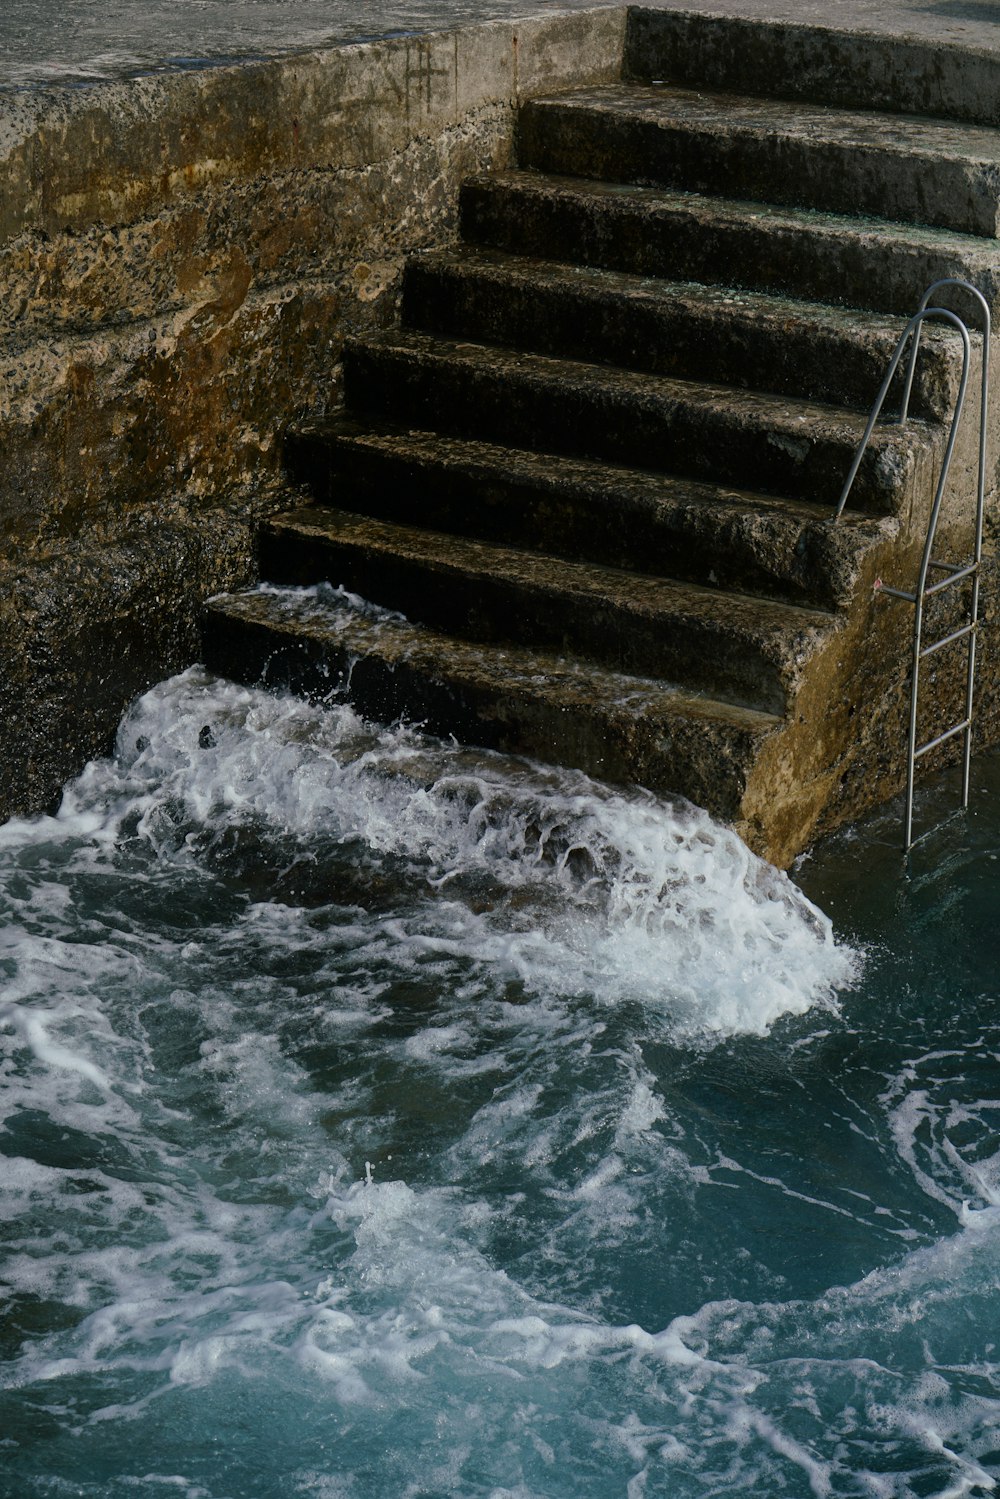 water waves hitting the concrete stairs